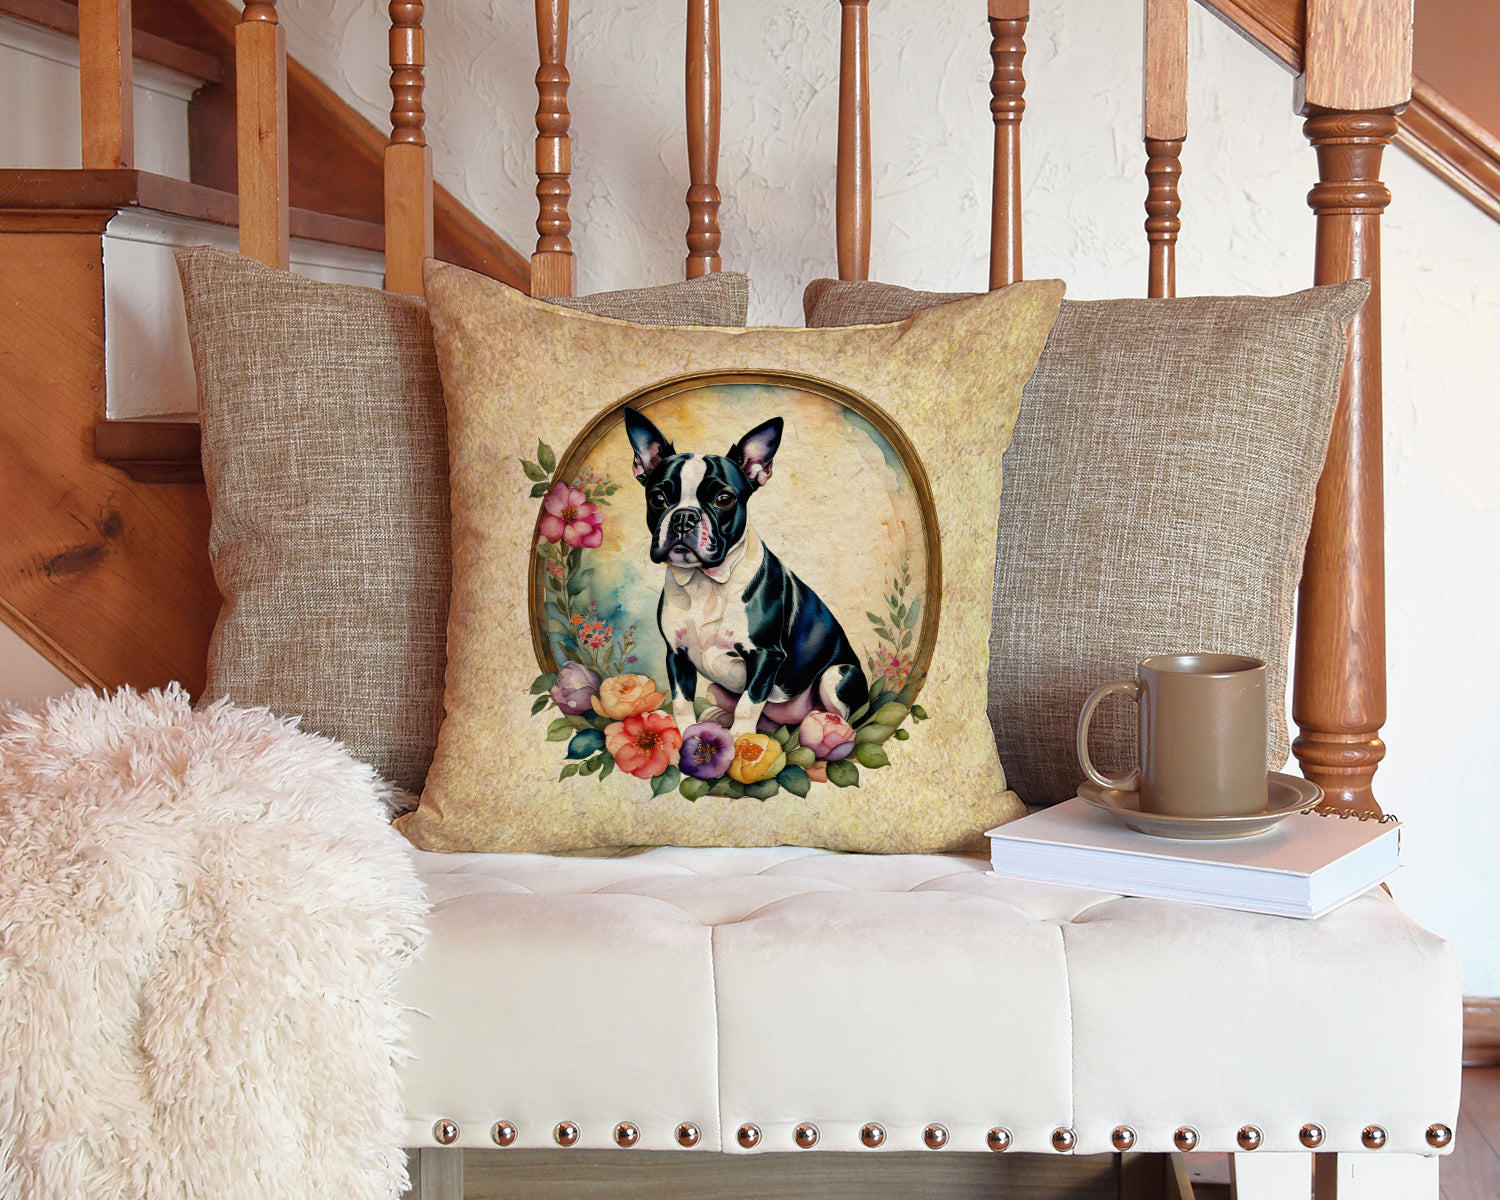 Boston Terrier and Flowers Fabric Decorative Pillow